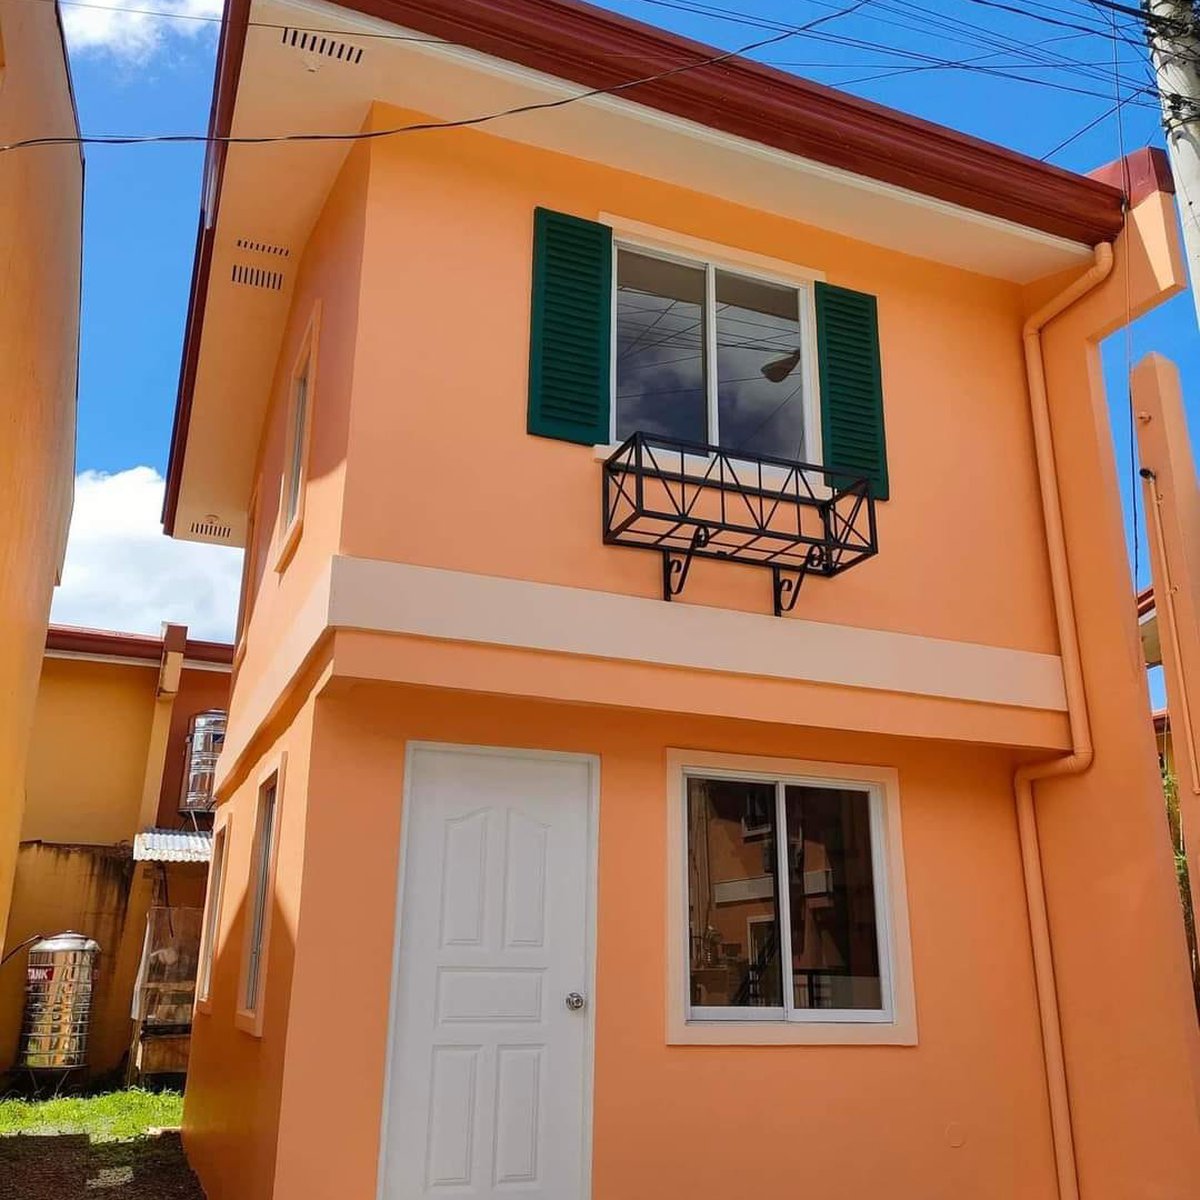 2 bedrooms ready for occupancy house and lot for sale in capiz